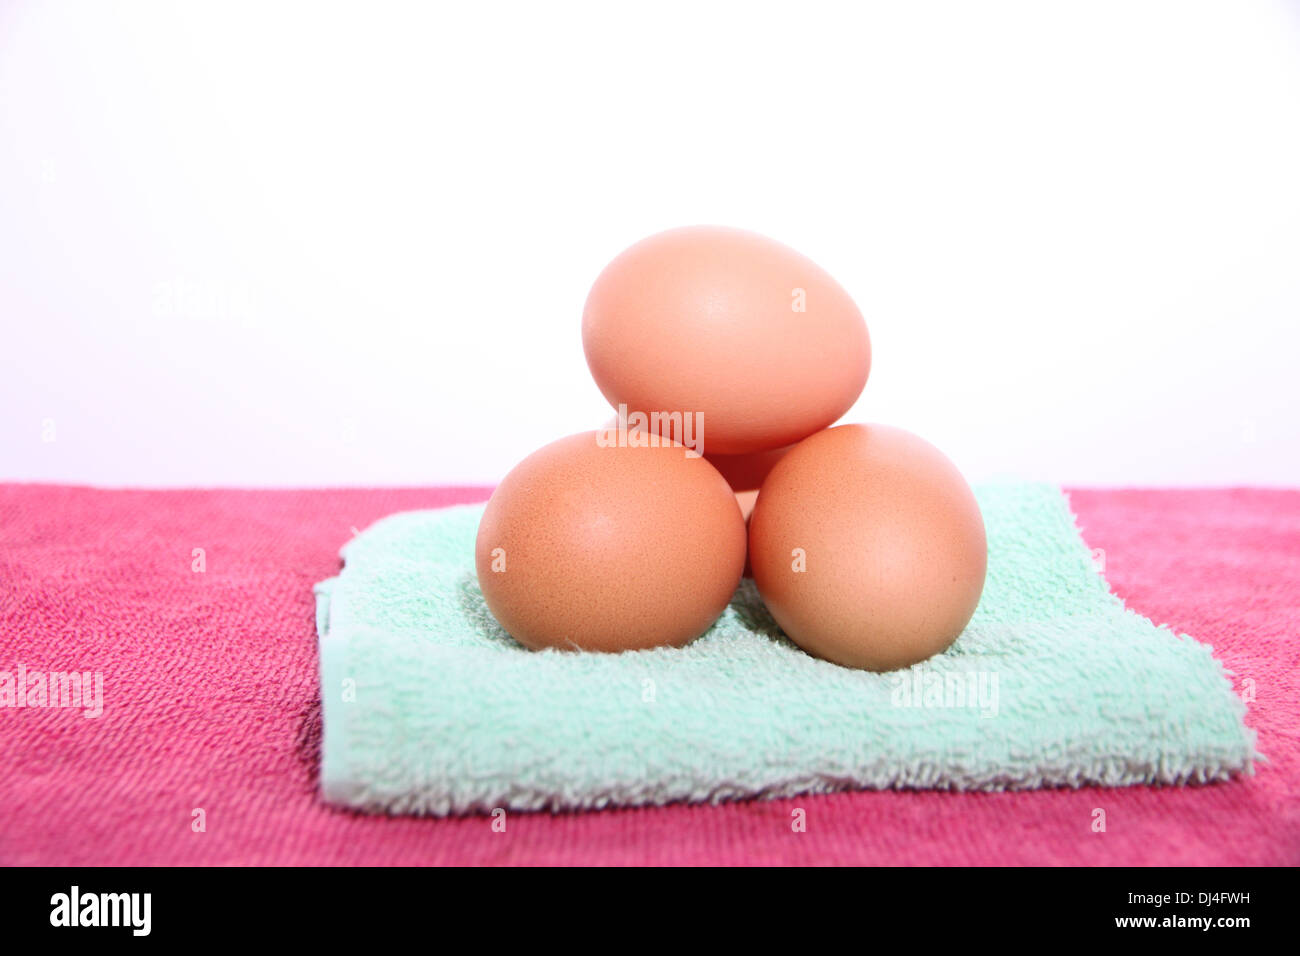 The picture Eggs on green and pink towel in white background. Stock Photo